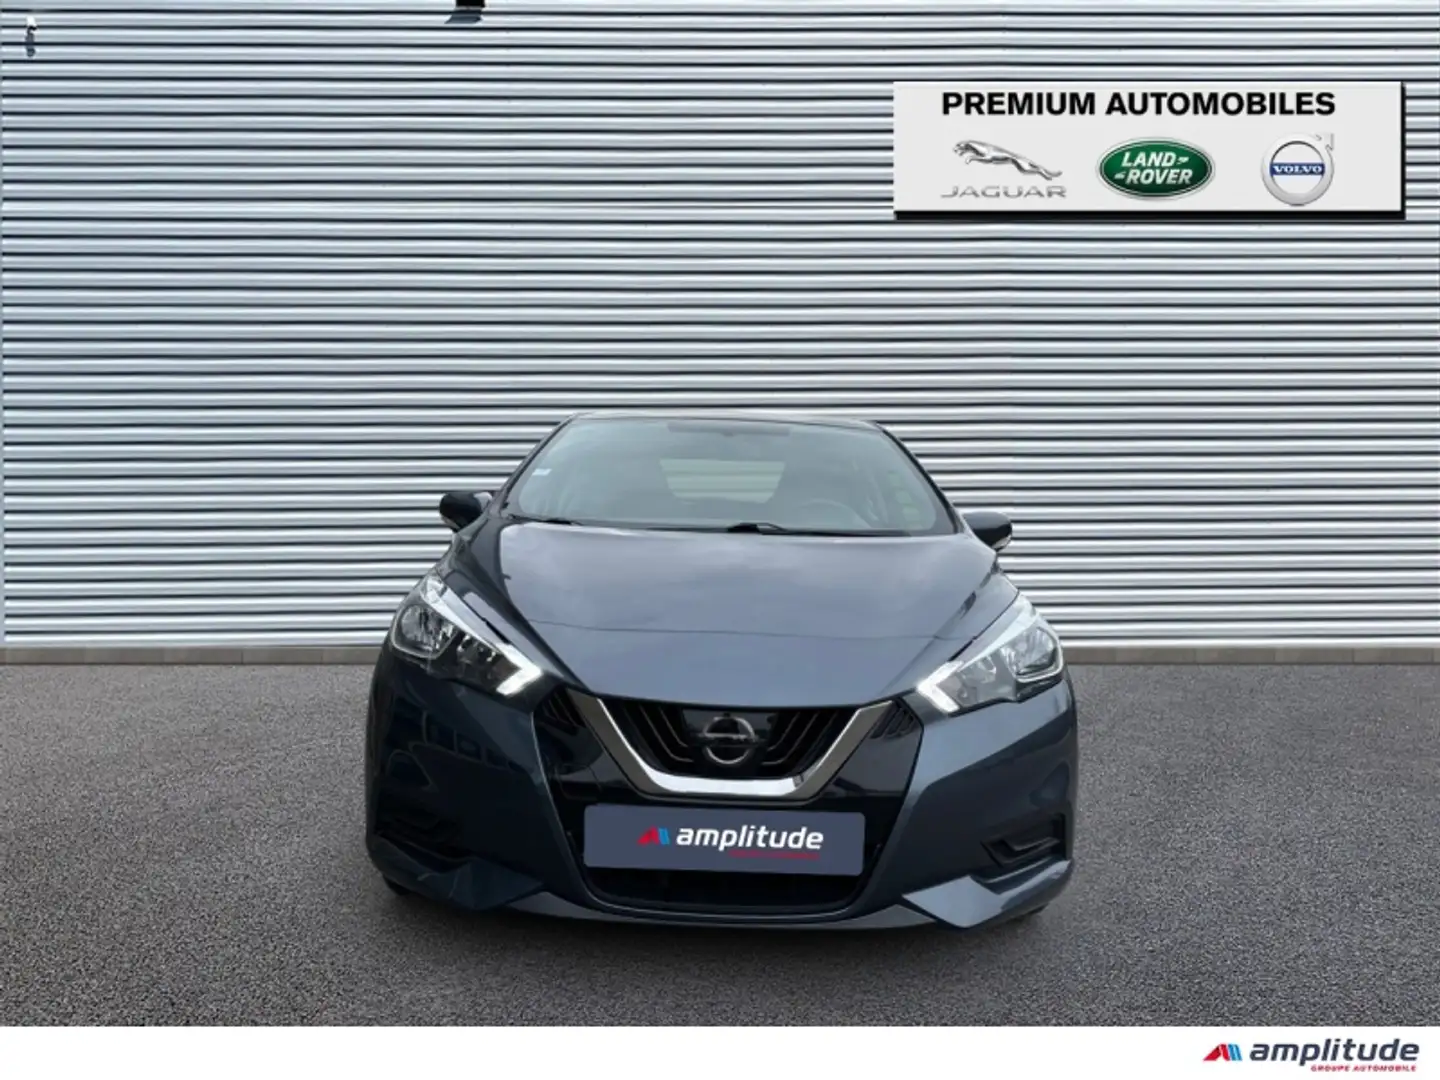 Nissan Micra 1.0 IG-T 100ch Business Edition 2019 - 2